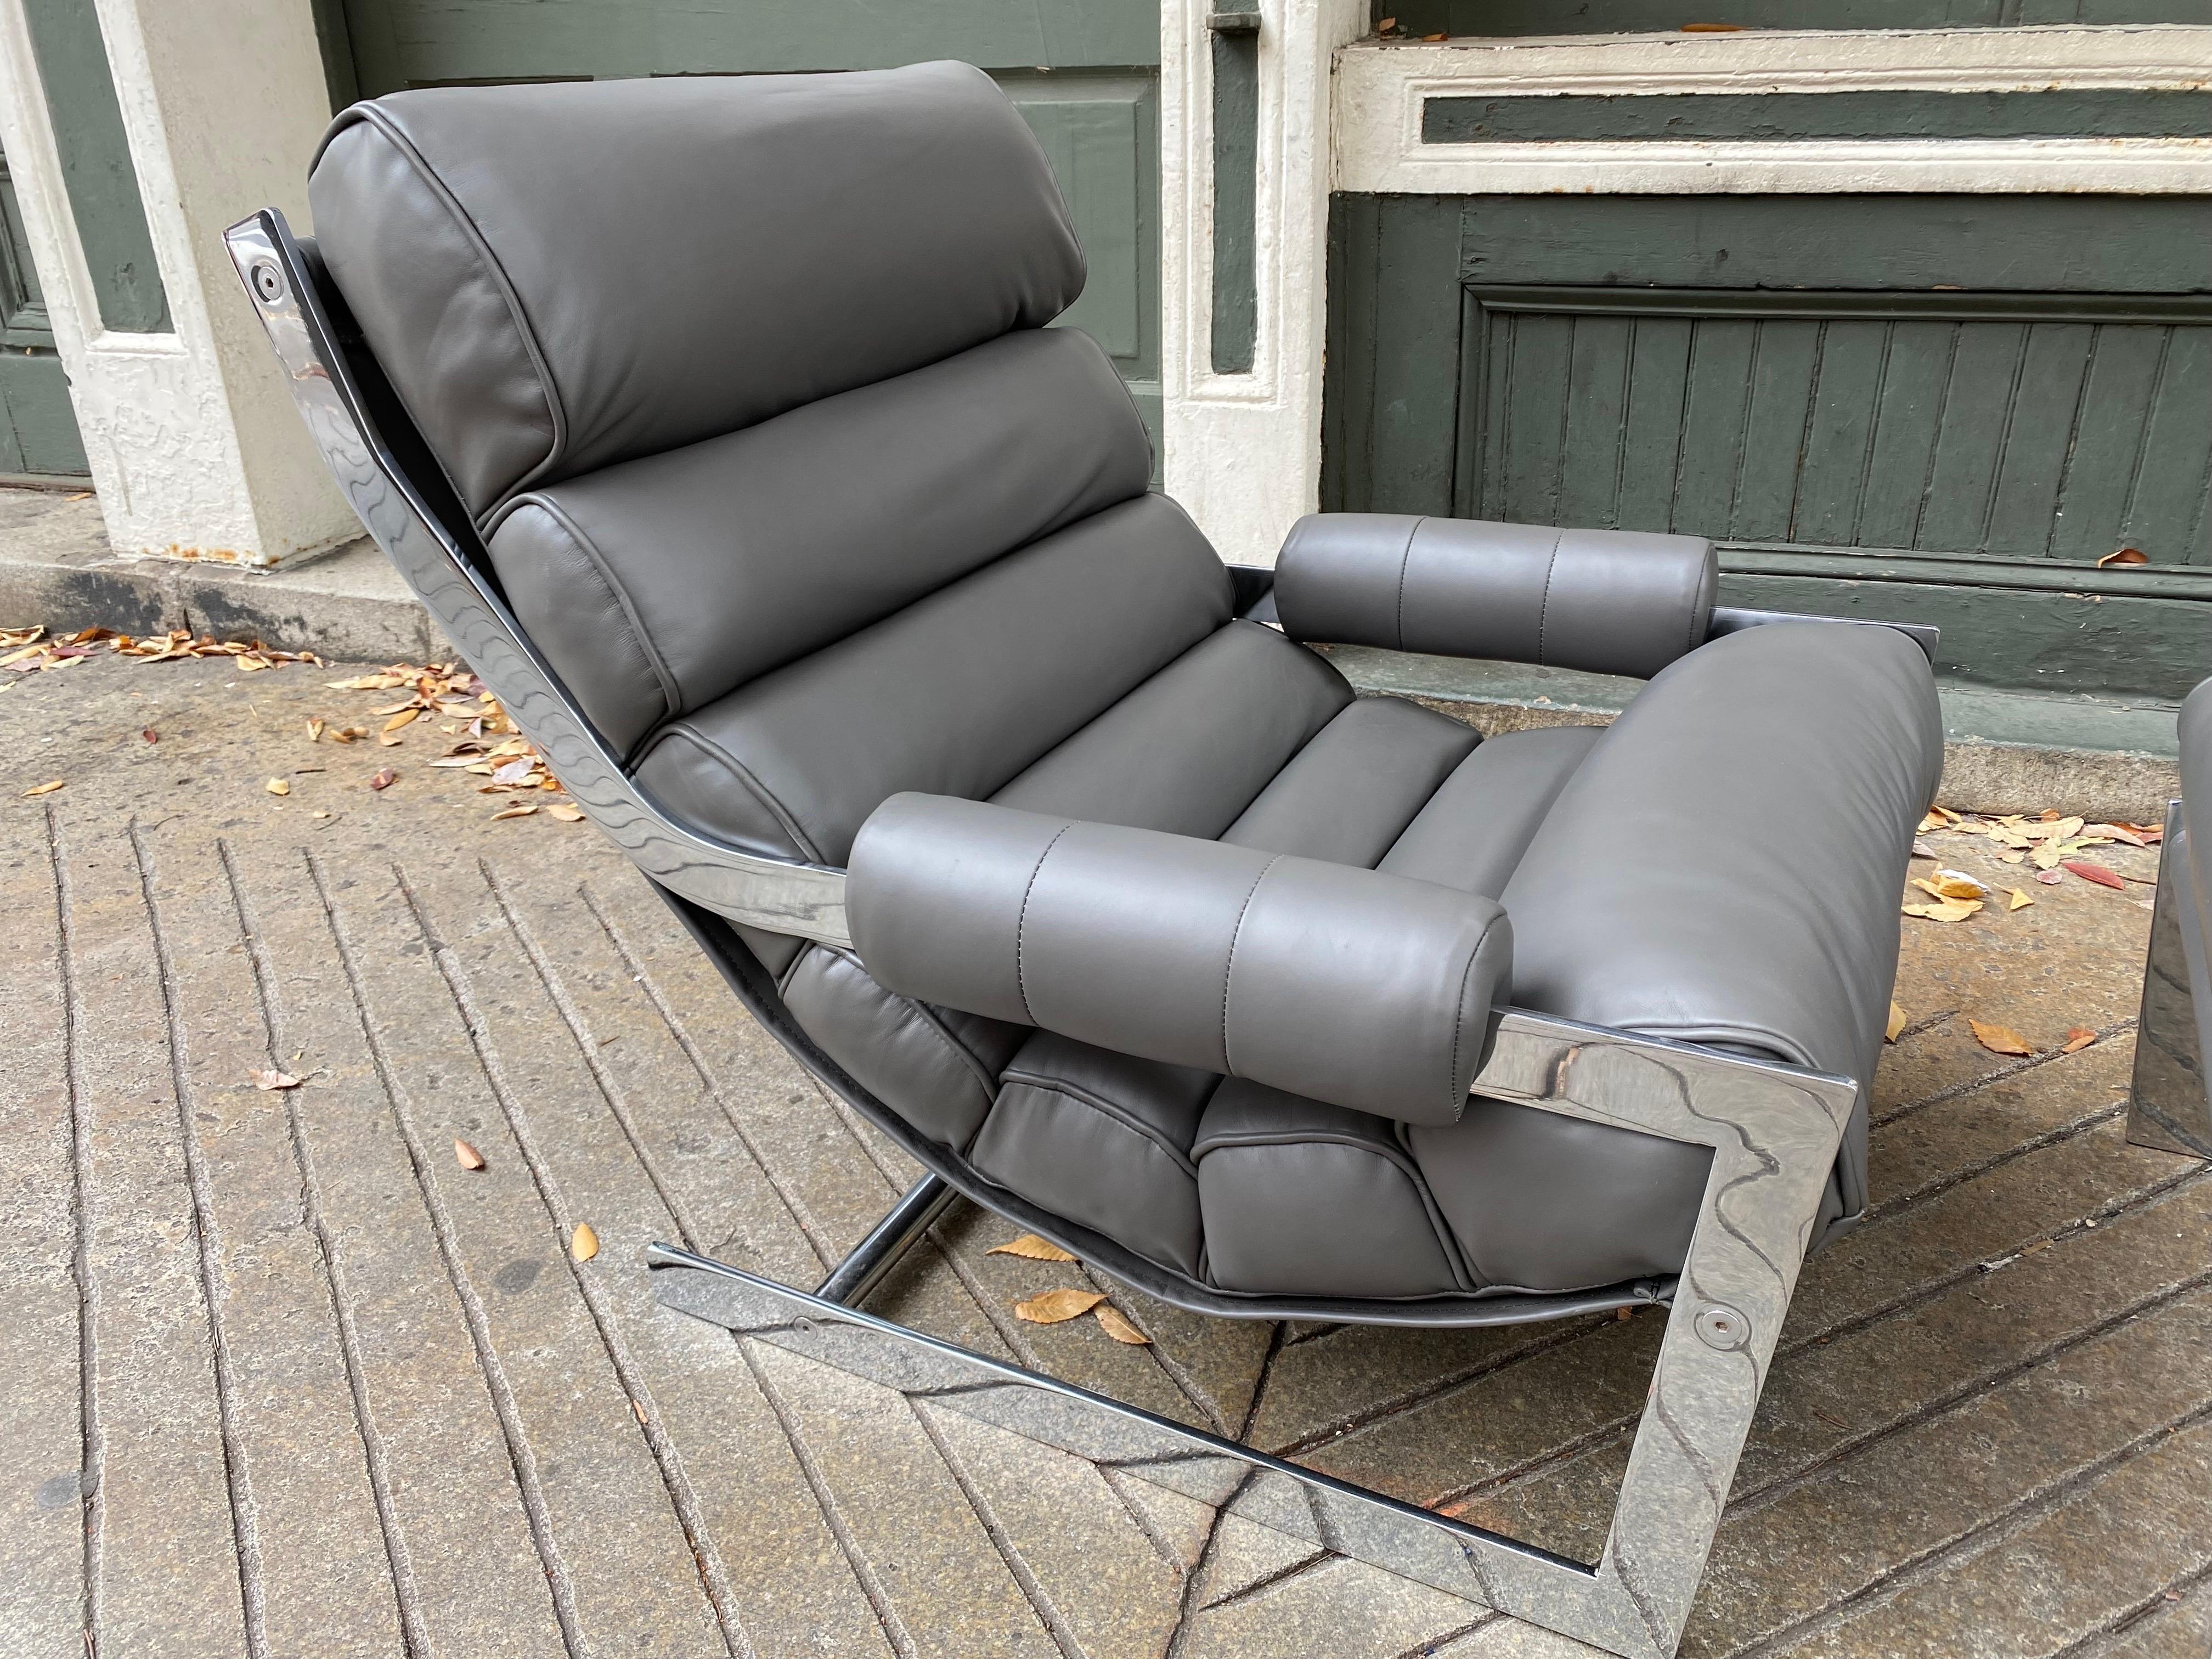 Low Sleek Flat-Band Chrome Lounge Chair and Ottoman.  Newly re-done in a dark gray leather.  Chrome is in amazing condition!  Milo Baughman meets Gilbert Rohde!  Have seen this chair listed before but no definitive designer or maker found. 